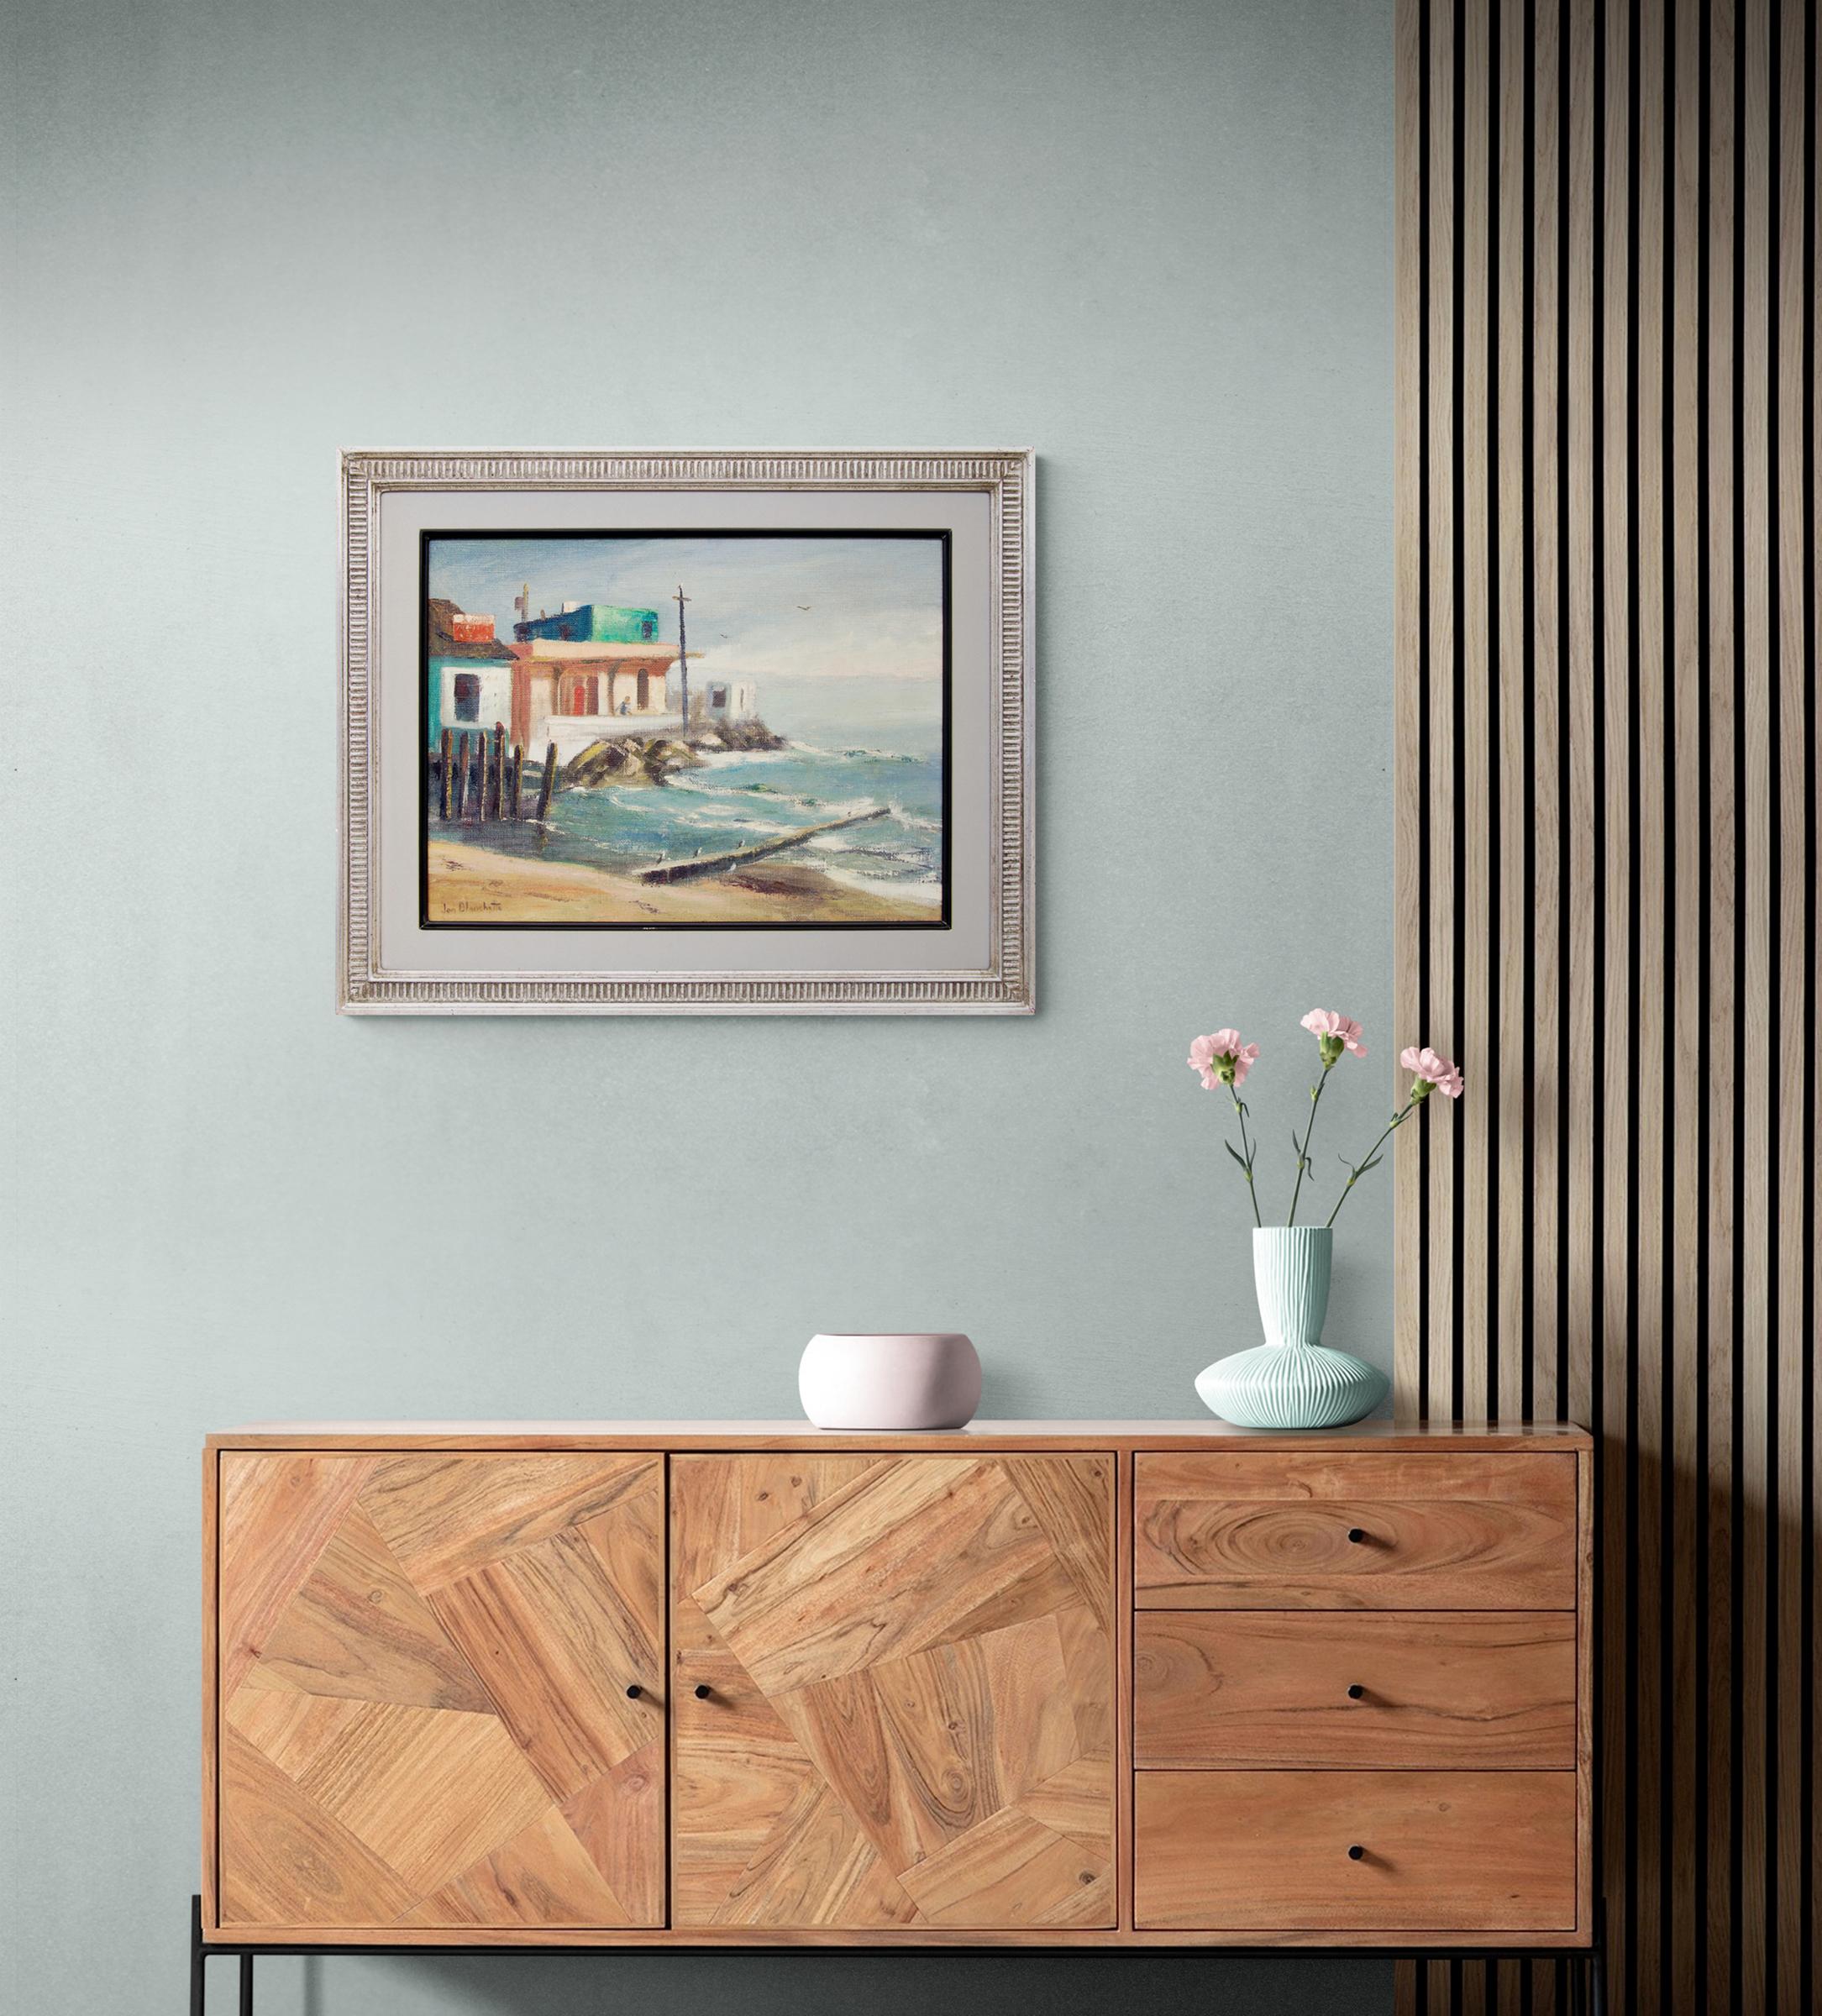 Capitola (California) is an oil on board painting by Jon Blanchette (1908-1987) circa 1955. Marine seascape painting with crashing waves and buildings along the coast painted in shades of blue, green, and orange. Presented in a custom frame, outer